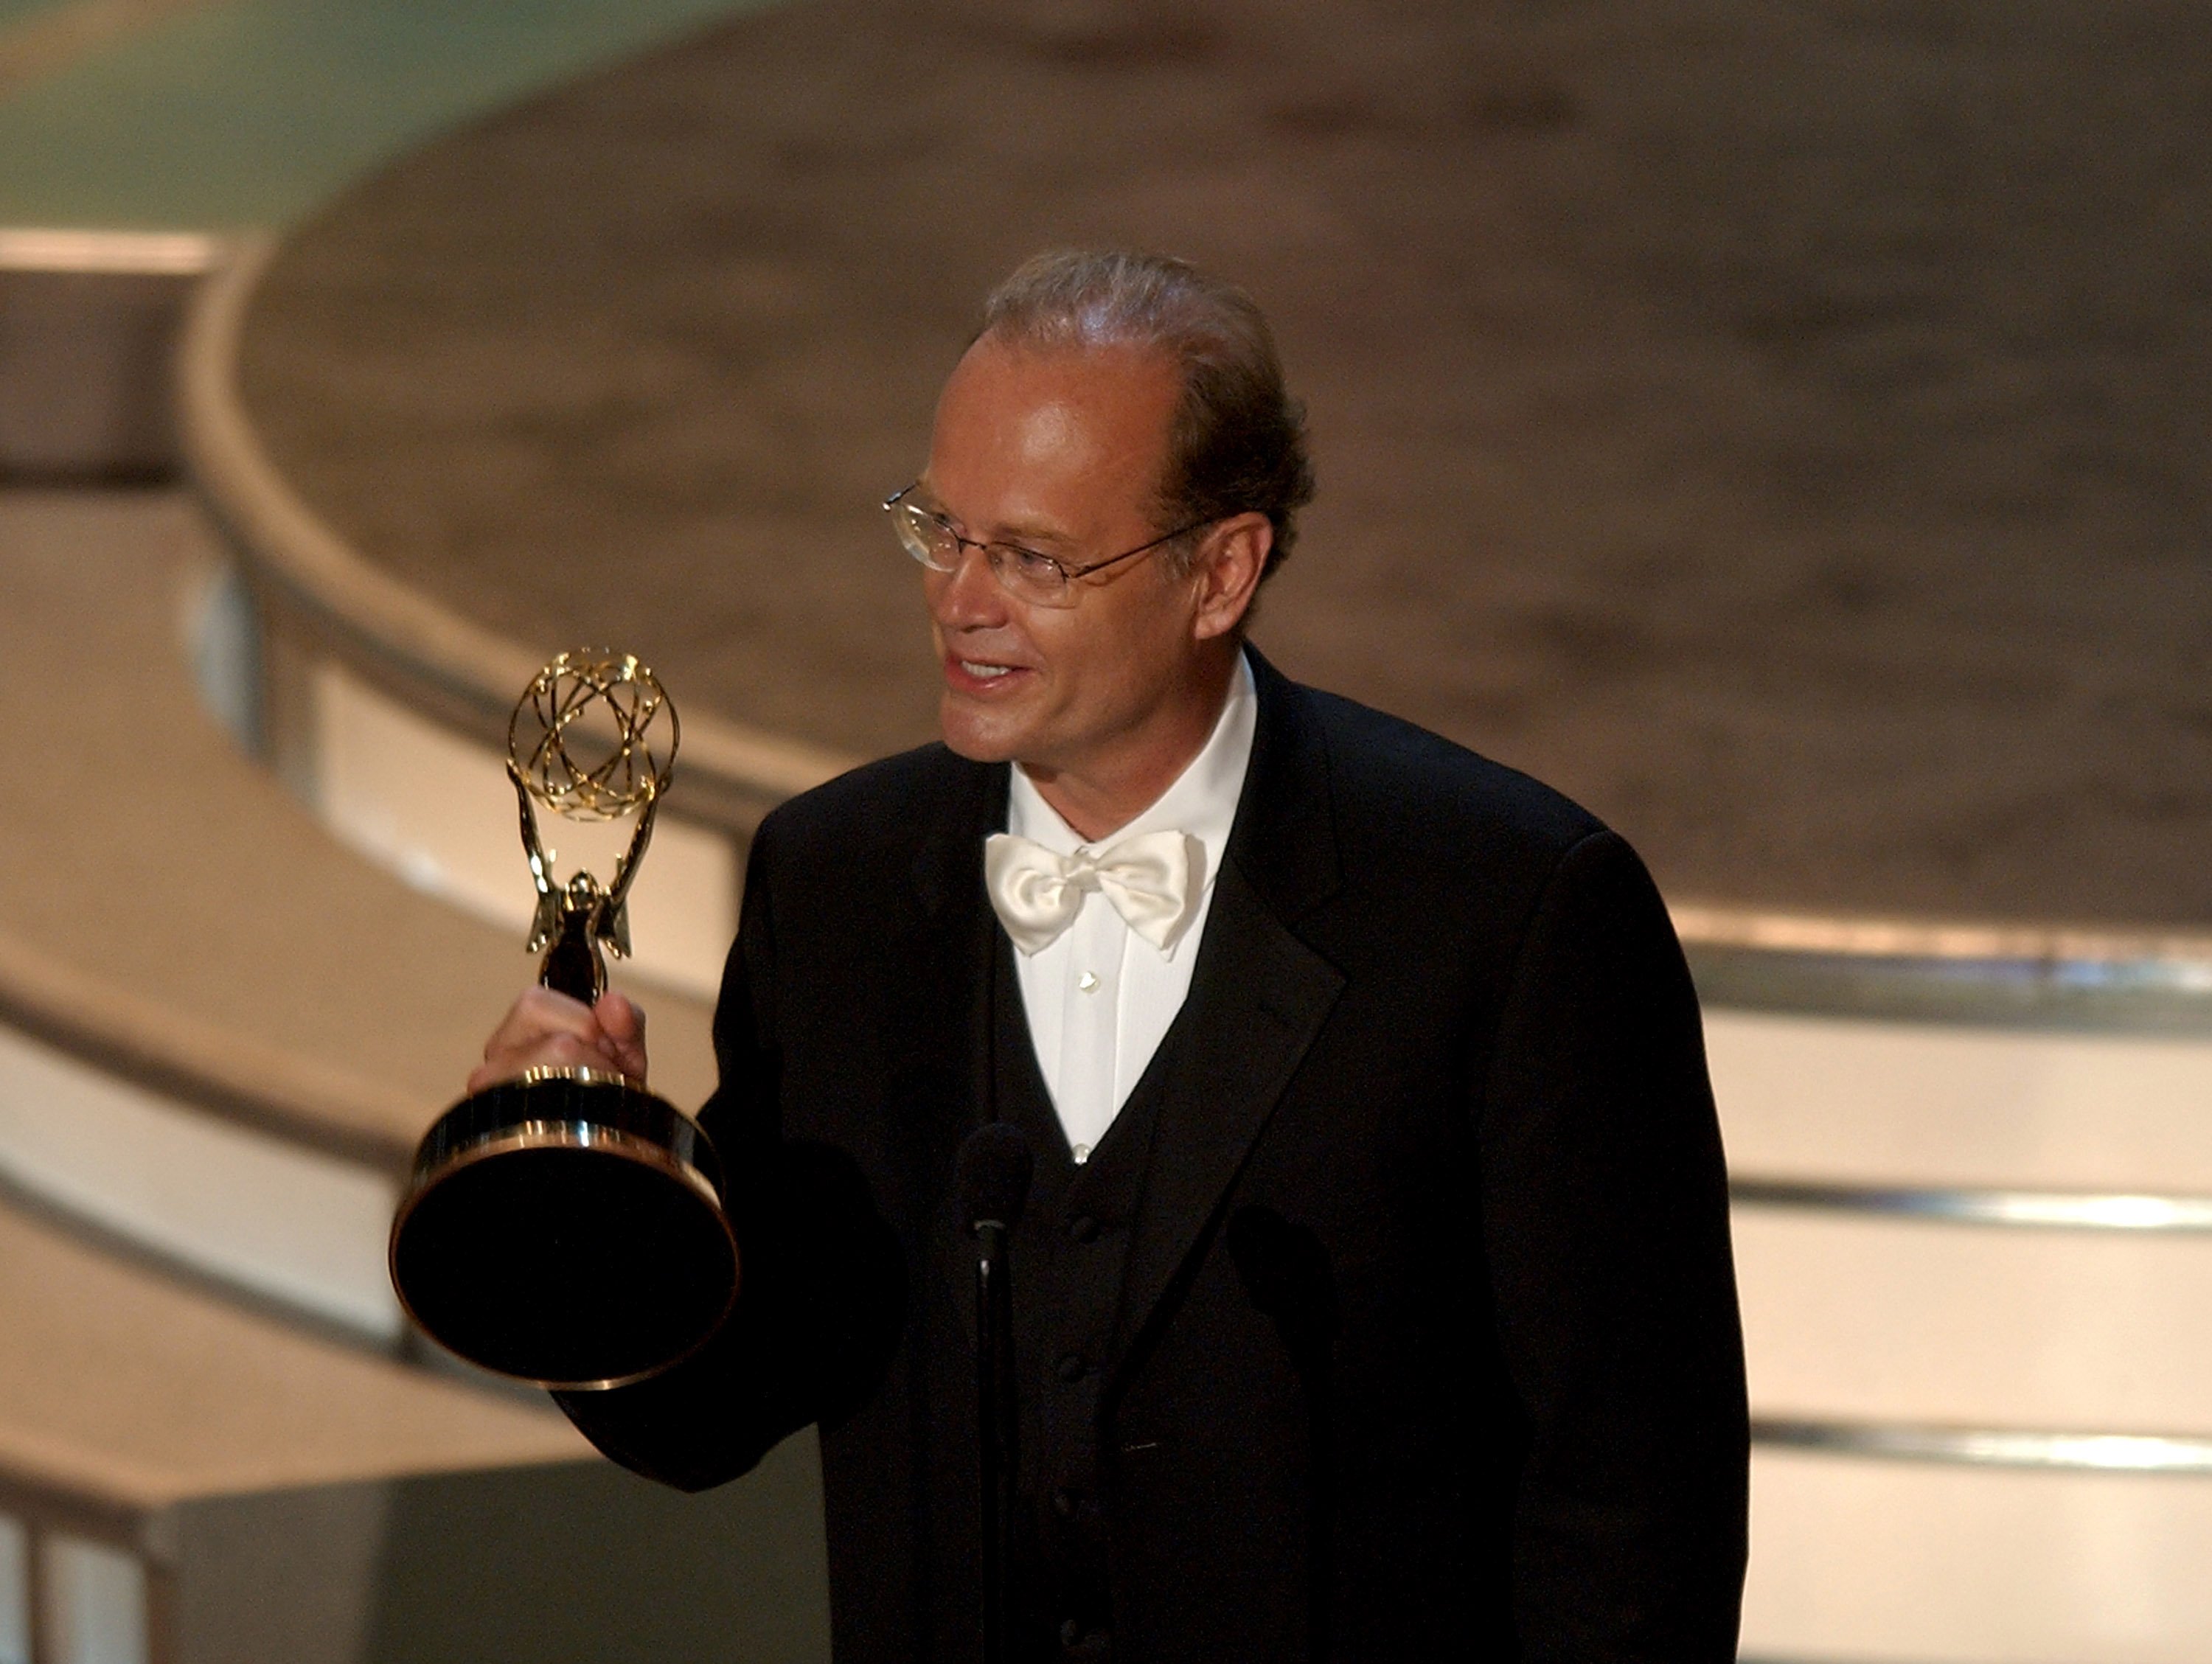 Kelsey Grammer on stage at the 56th Annual Primetime Emmy Awards accepting the award for Outsanding Lead Actor in a Comedy Series for his work on 'Frasier' 